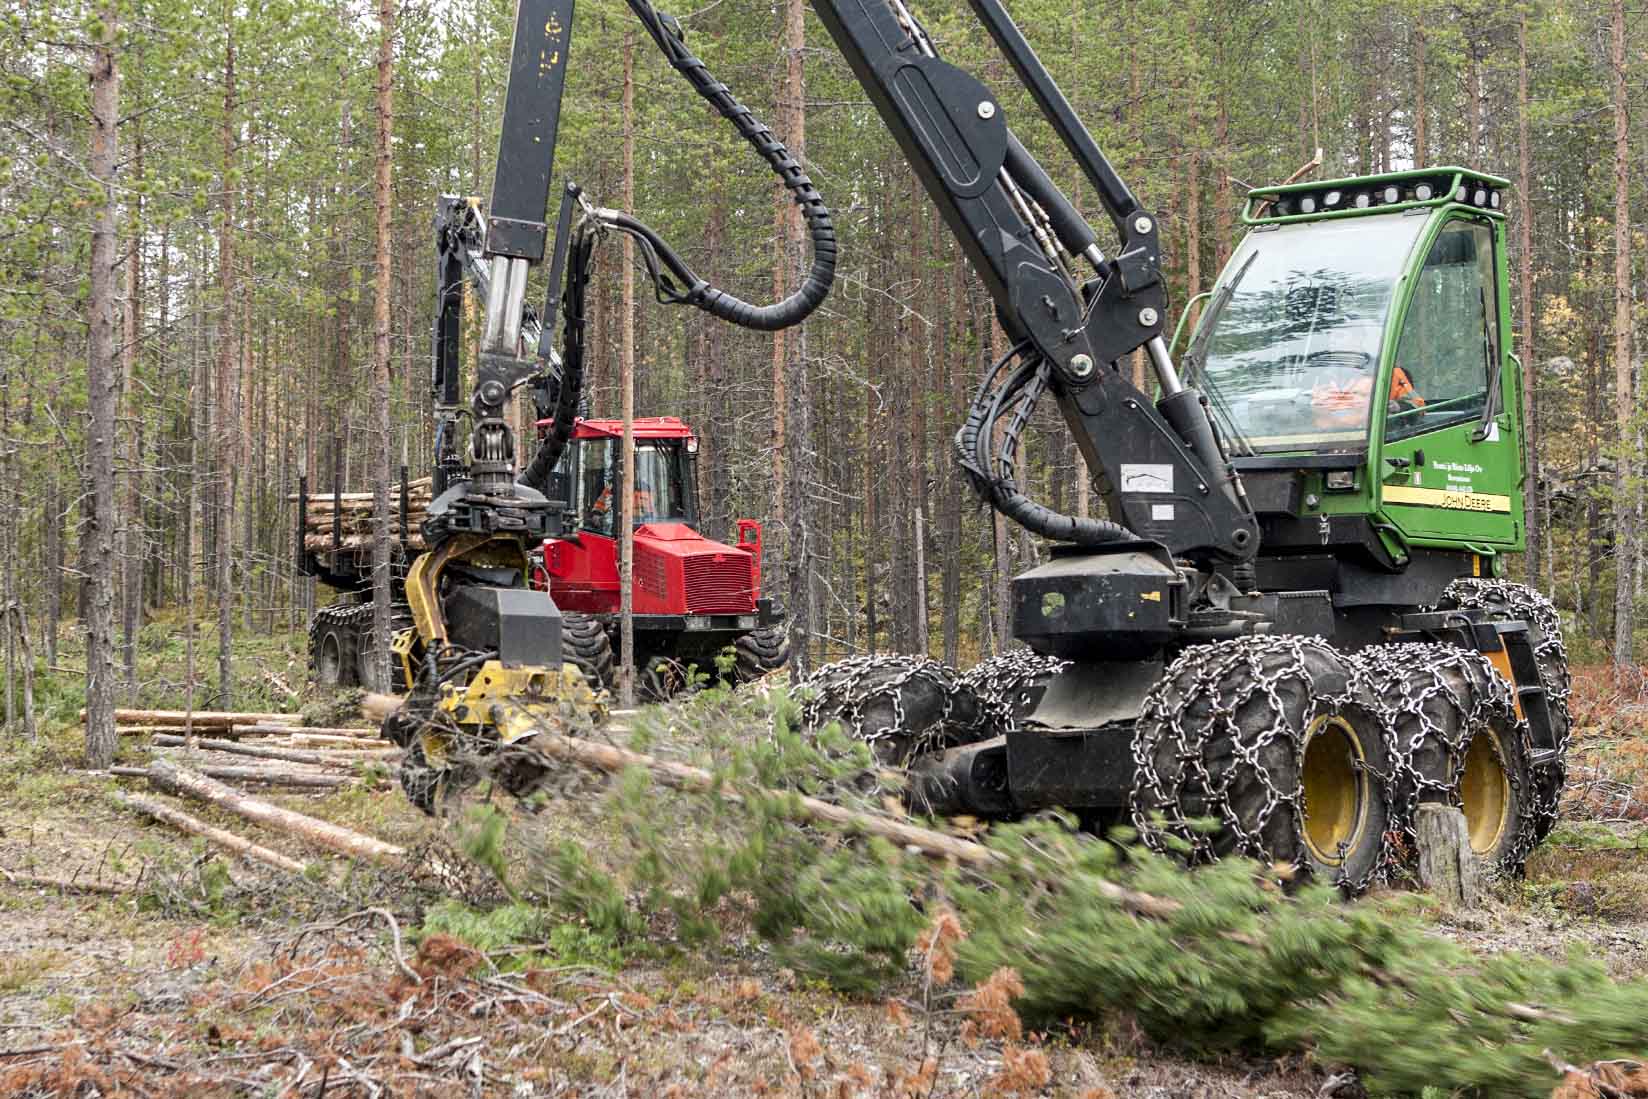 In Finland, no forests are grown for the express purpose of generating energy. Wood used for energy is a by-product from fellings, forestry operations and the forest industry.